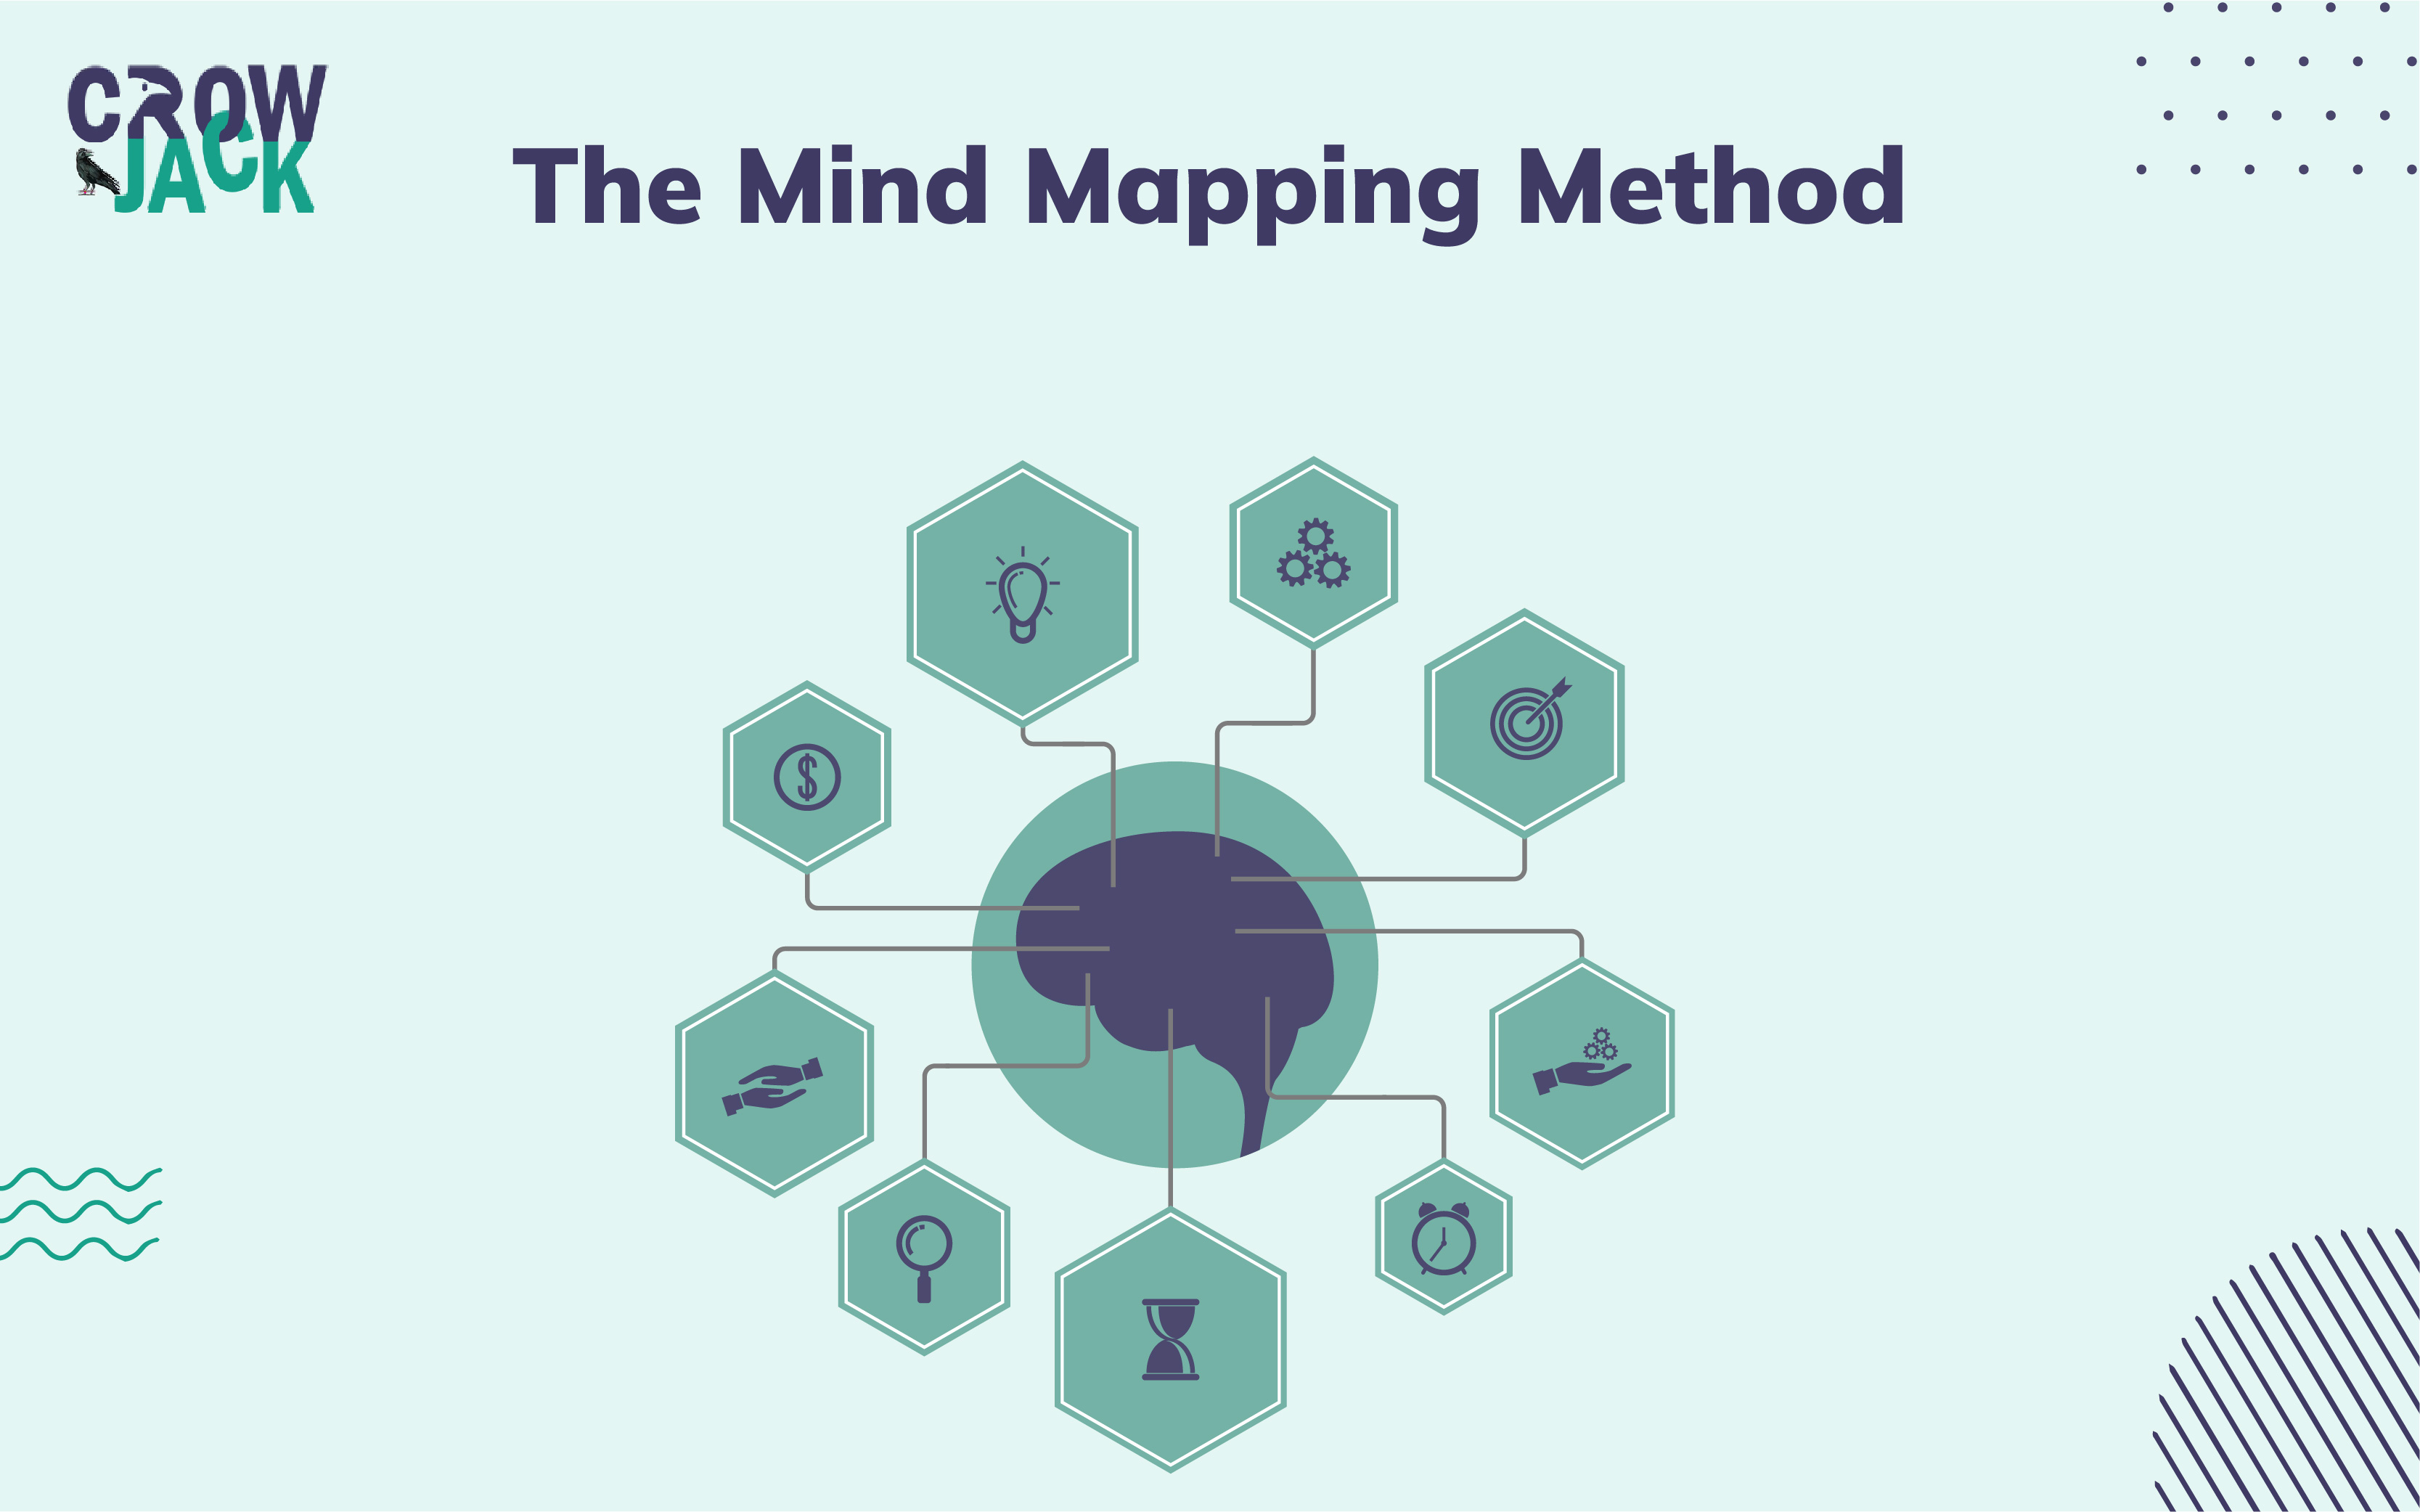 The Mind Mapping Method